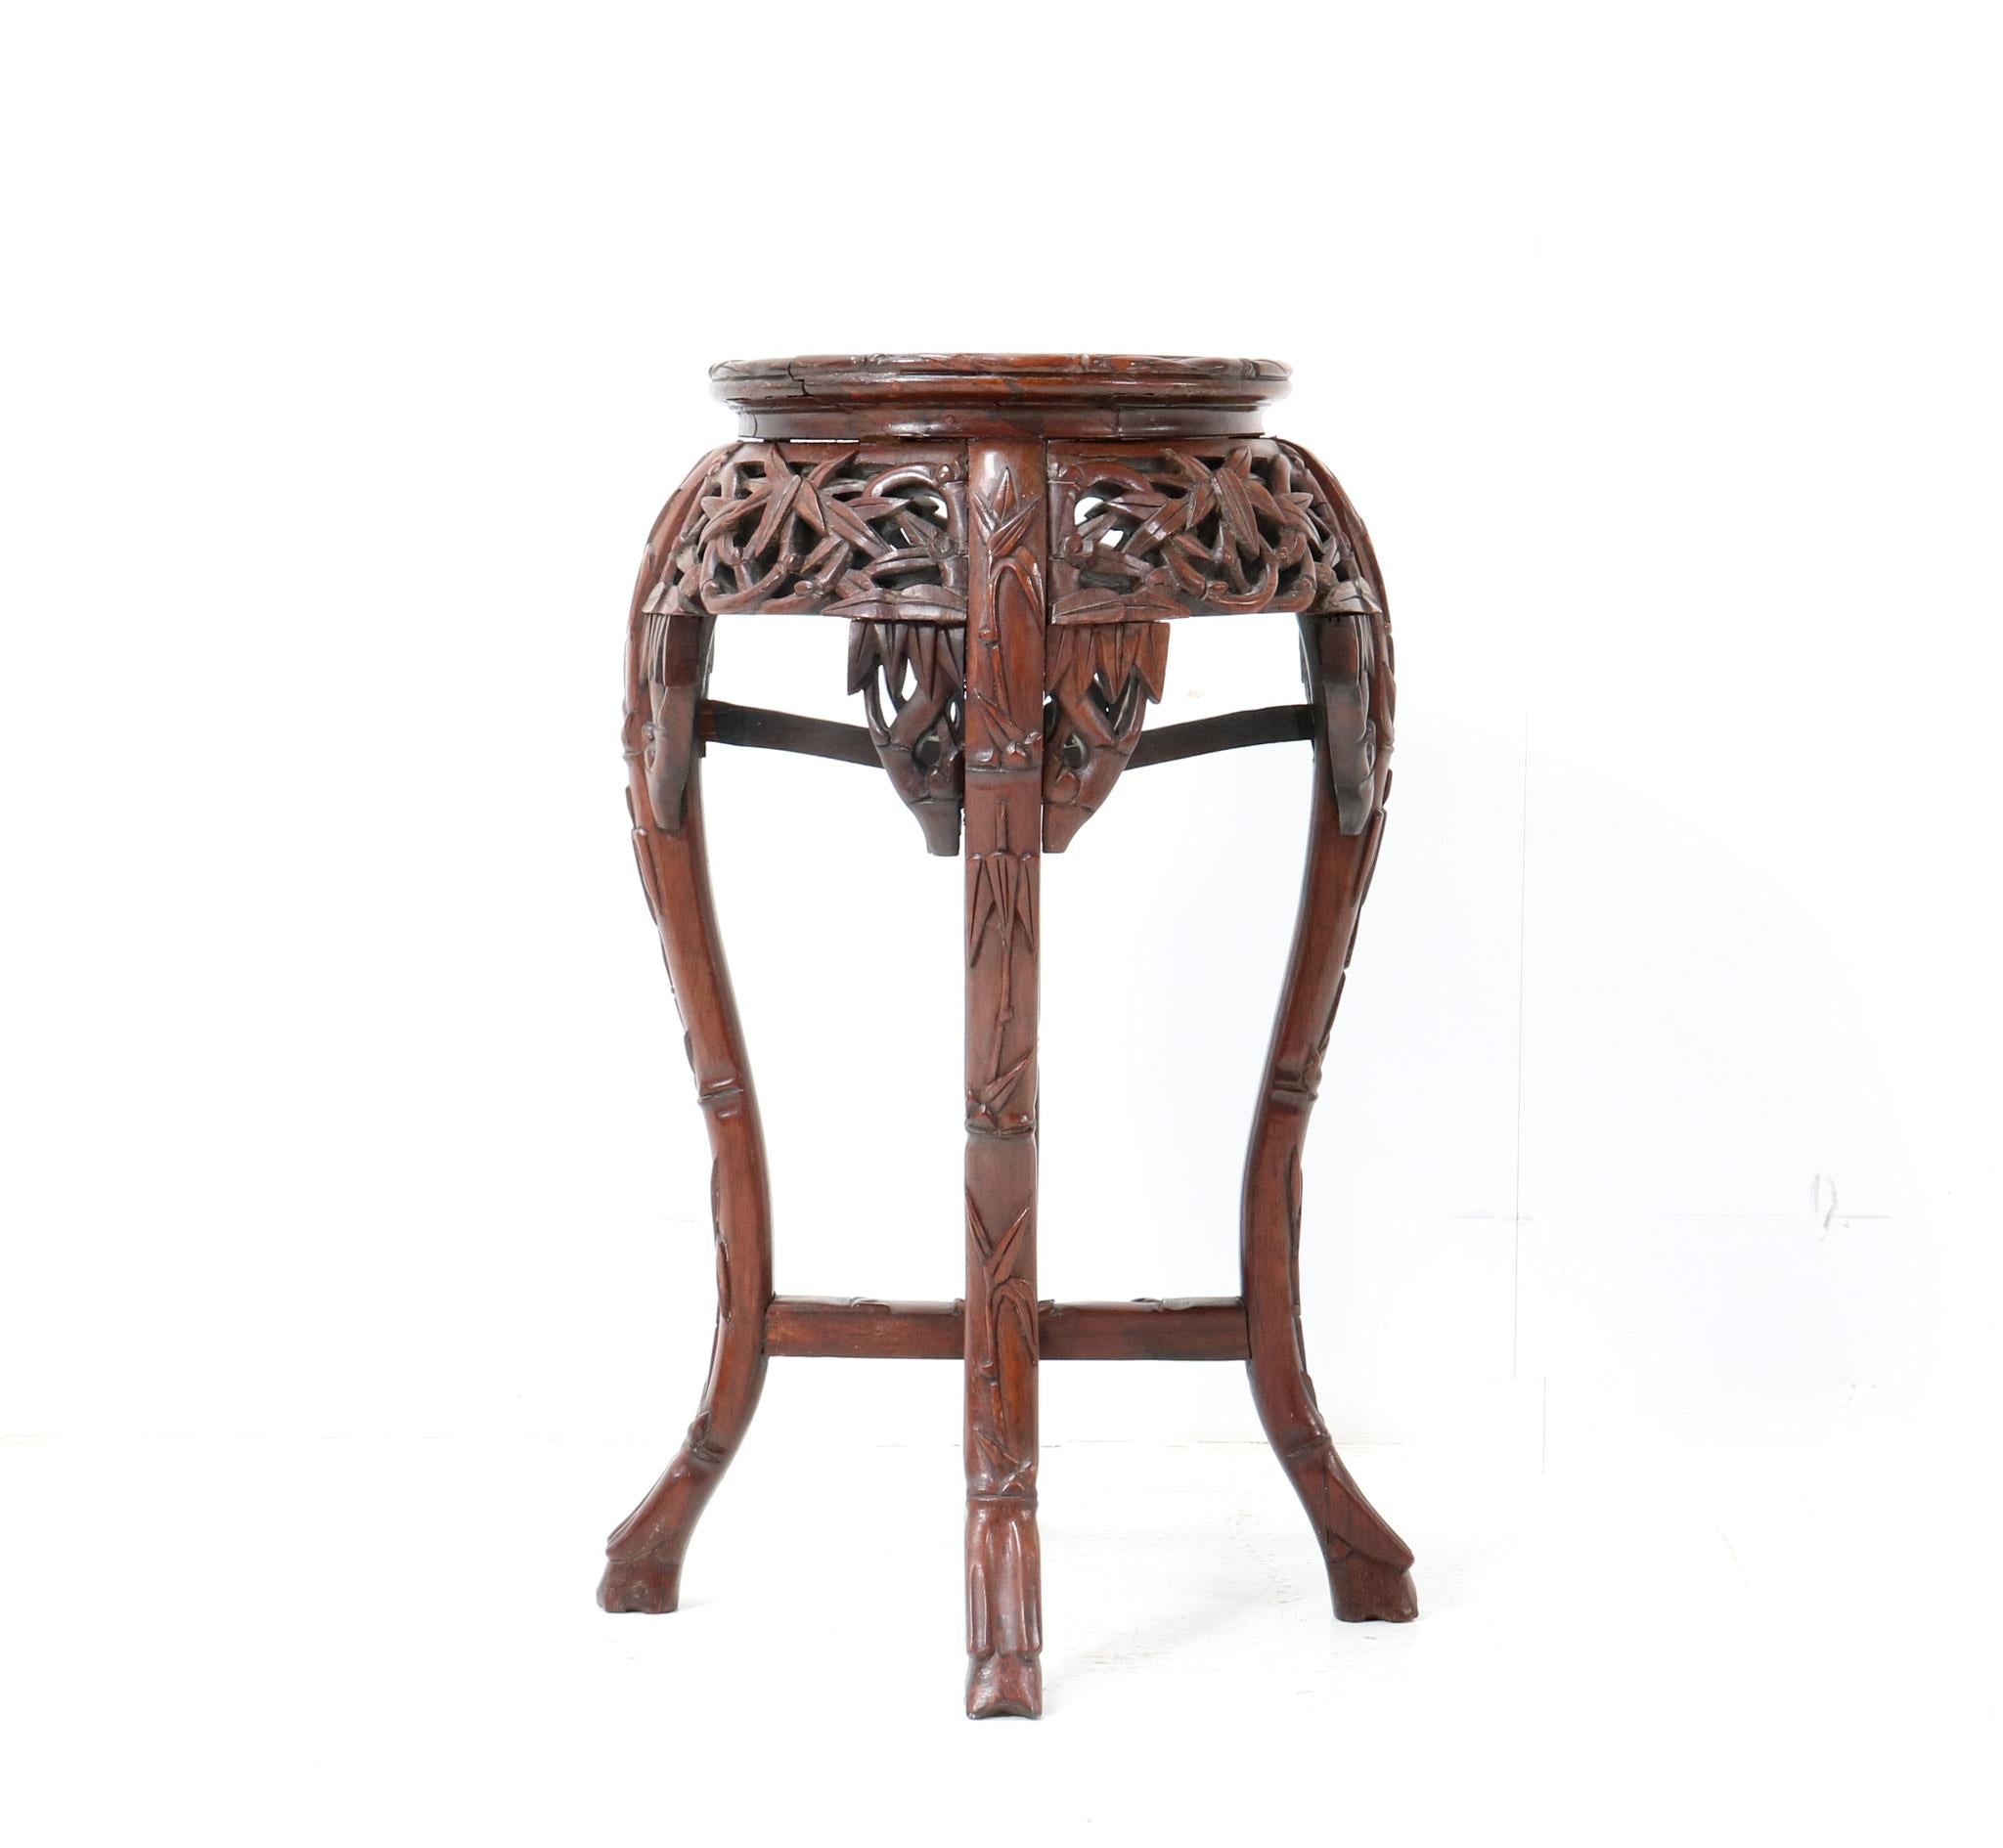 Stunning and elegant Chinese pedestal table. Striking Chinese design from the 1920s. hand carved 